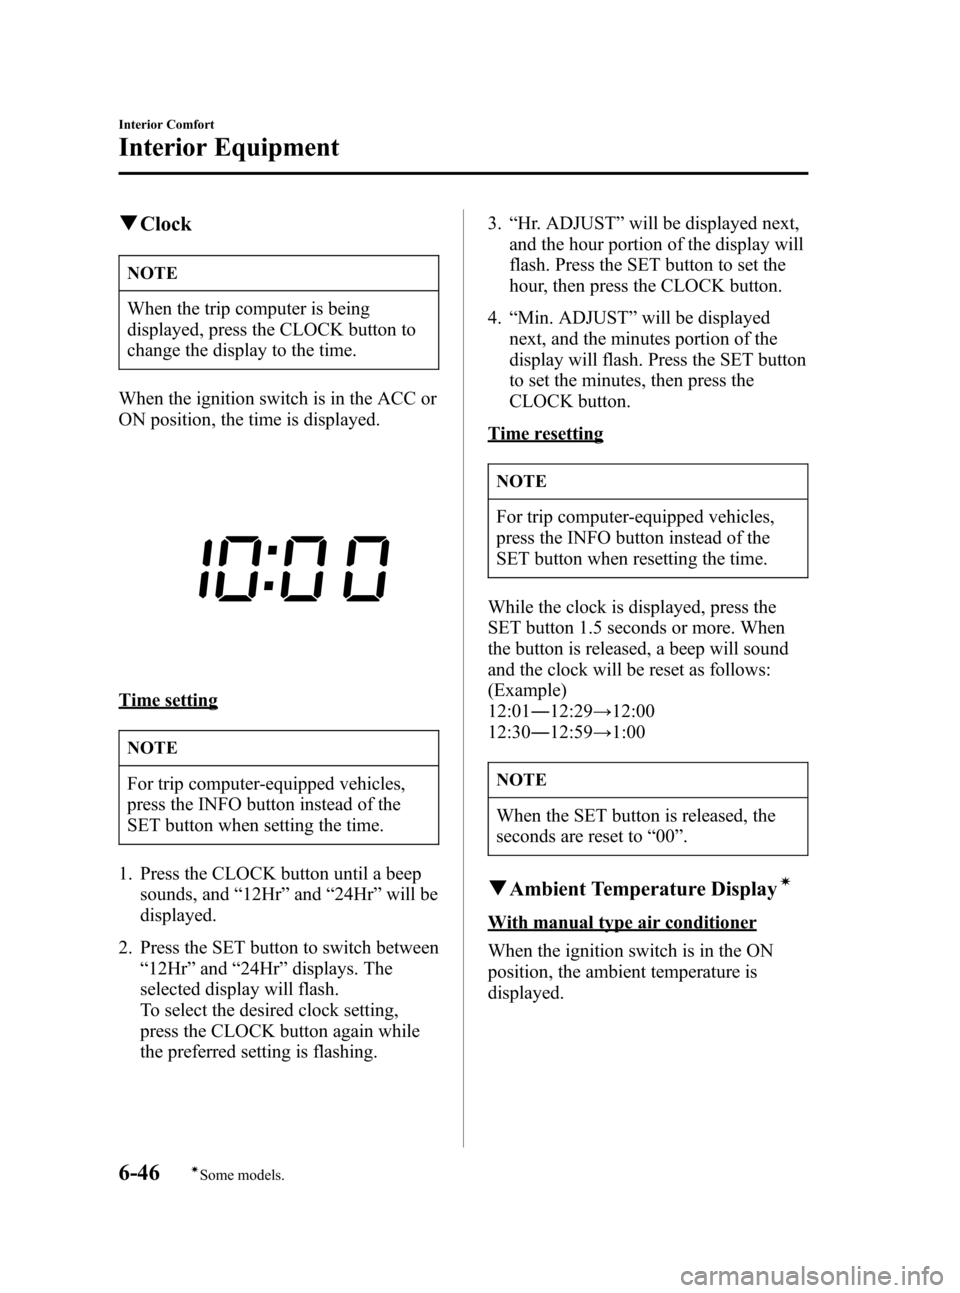 MAZDA MODEL 3 HATCHBACK 2006  Owners Manual (in English) Black plate (216,1)
qClock
NOTE
When the trip computer is being
displayed, press the CLOCK button to
change the display to the time.
When the ignition switch is in the ACC or
ON position, the time is 